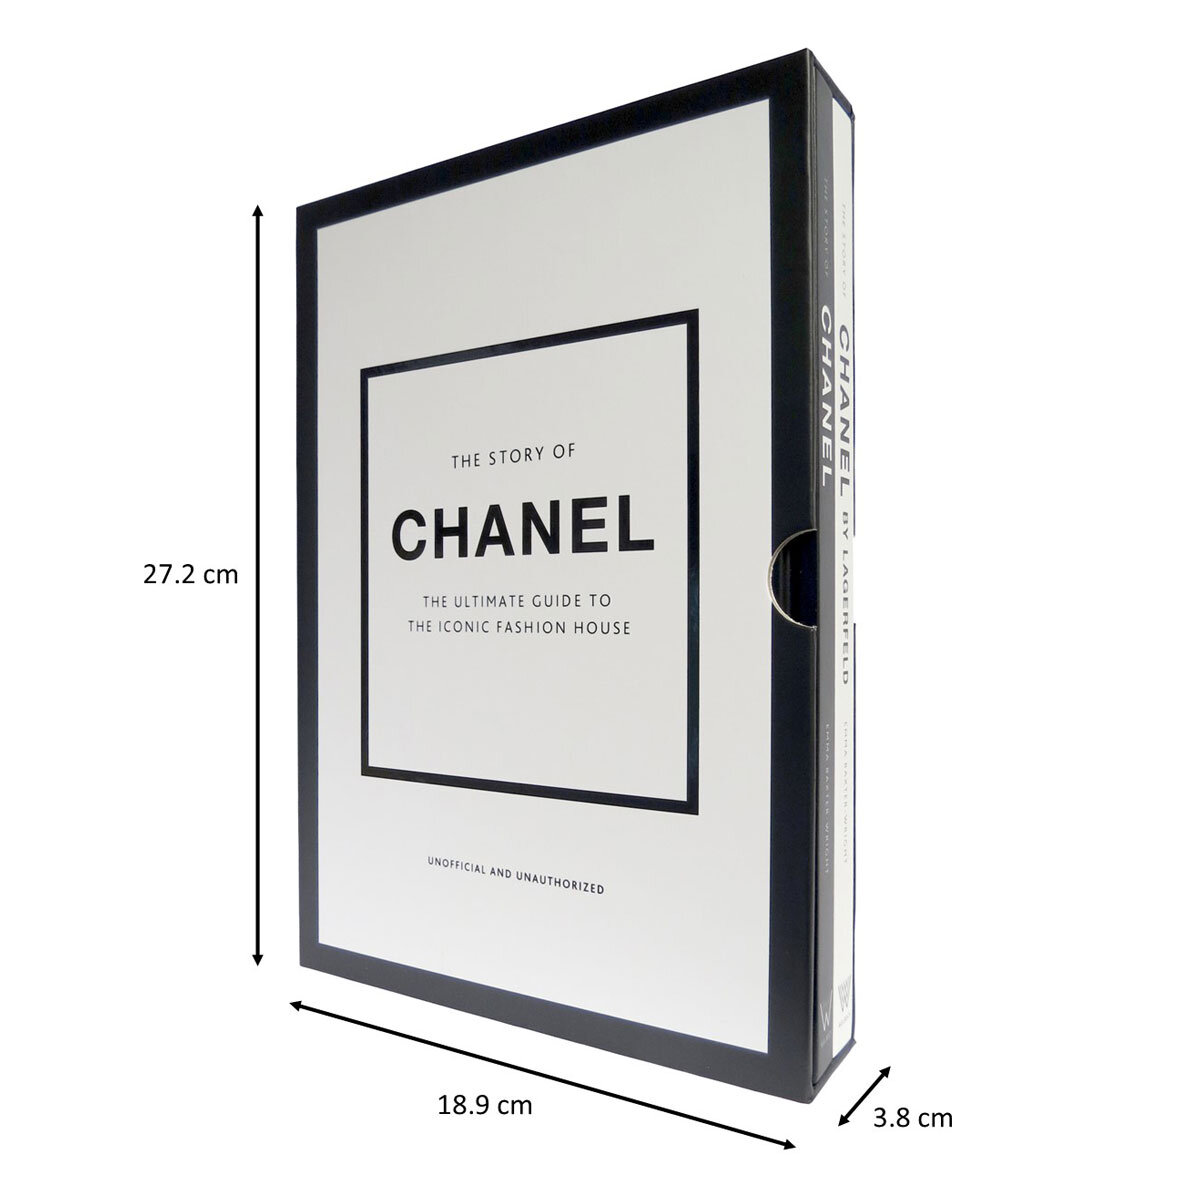 Image of Story of Channel slipcase book with dimensions